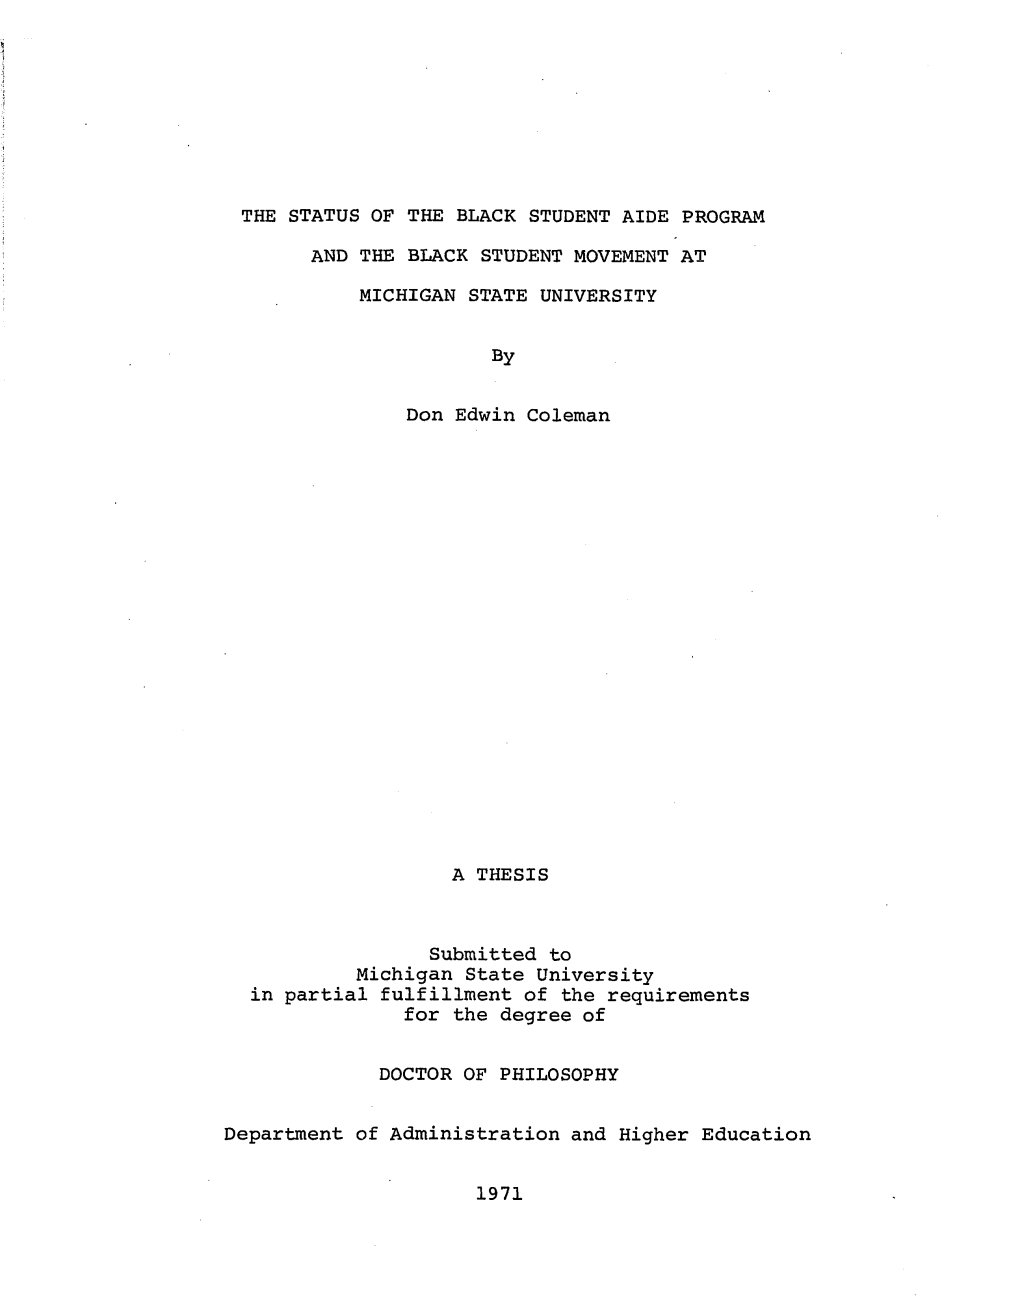 The Status of the Black Student Aide Program and the Black Student Movement at Michigan State University